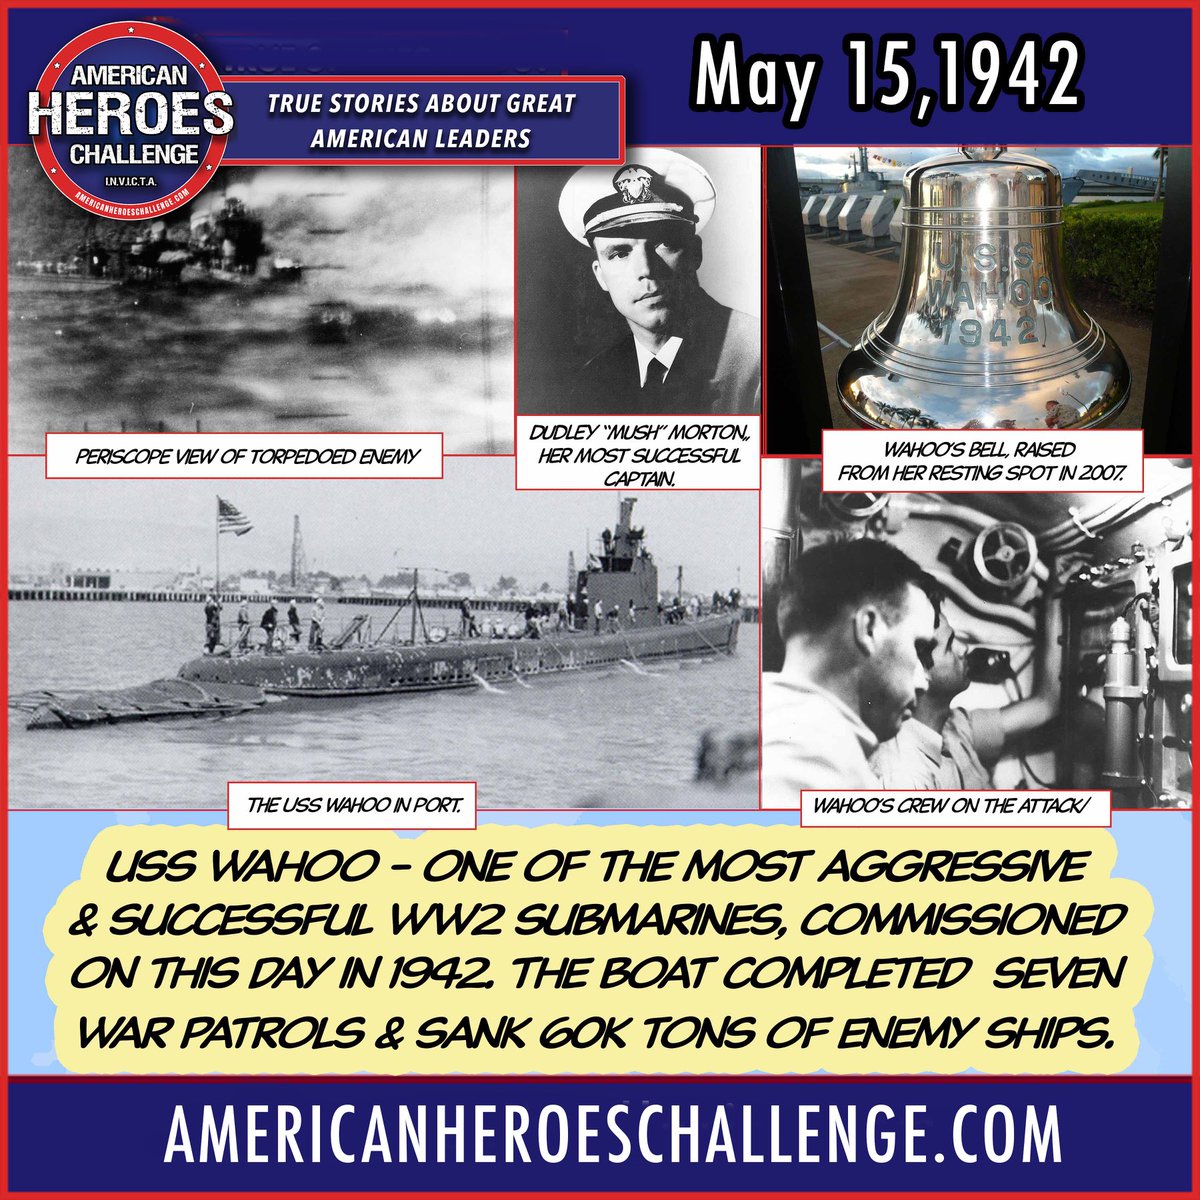 USS Wahoo was commissioned on this day - one of the most aggressive and successful submarines of World War II! Great American leaders and heroes sailed her. Honor and remember!